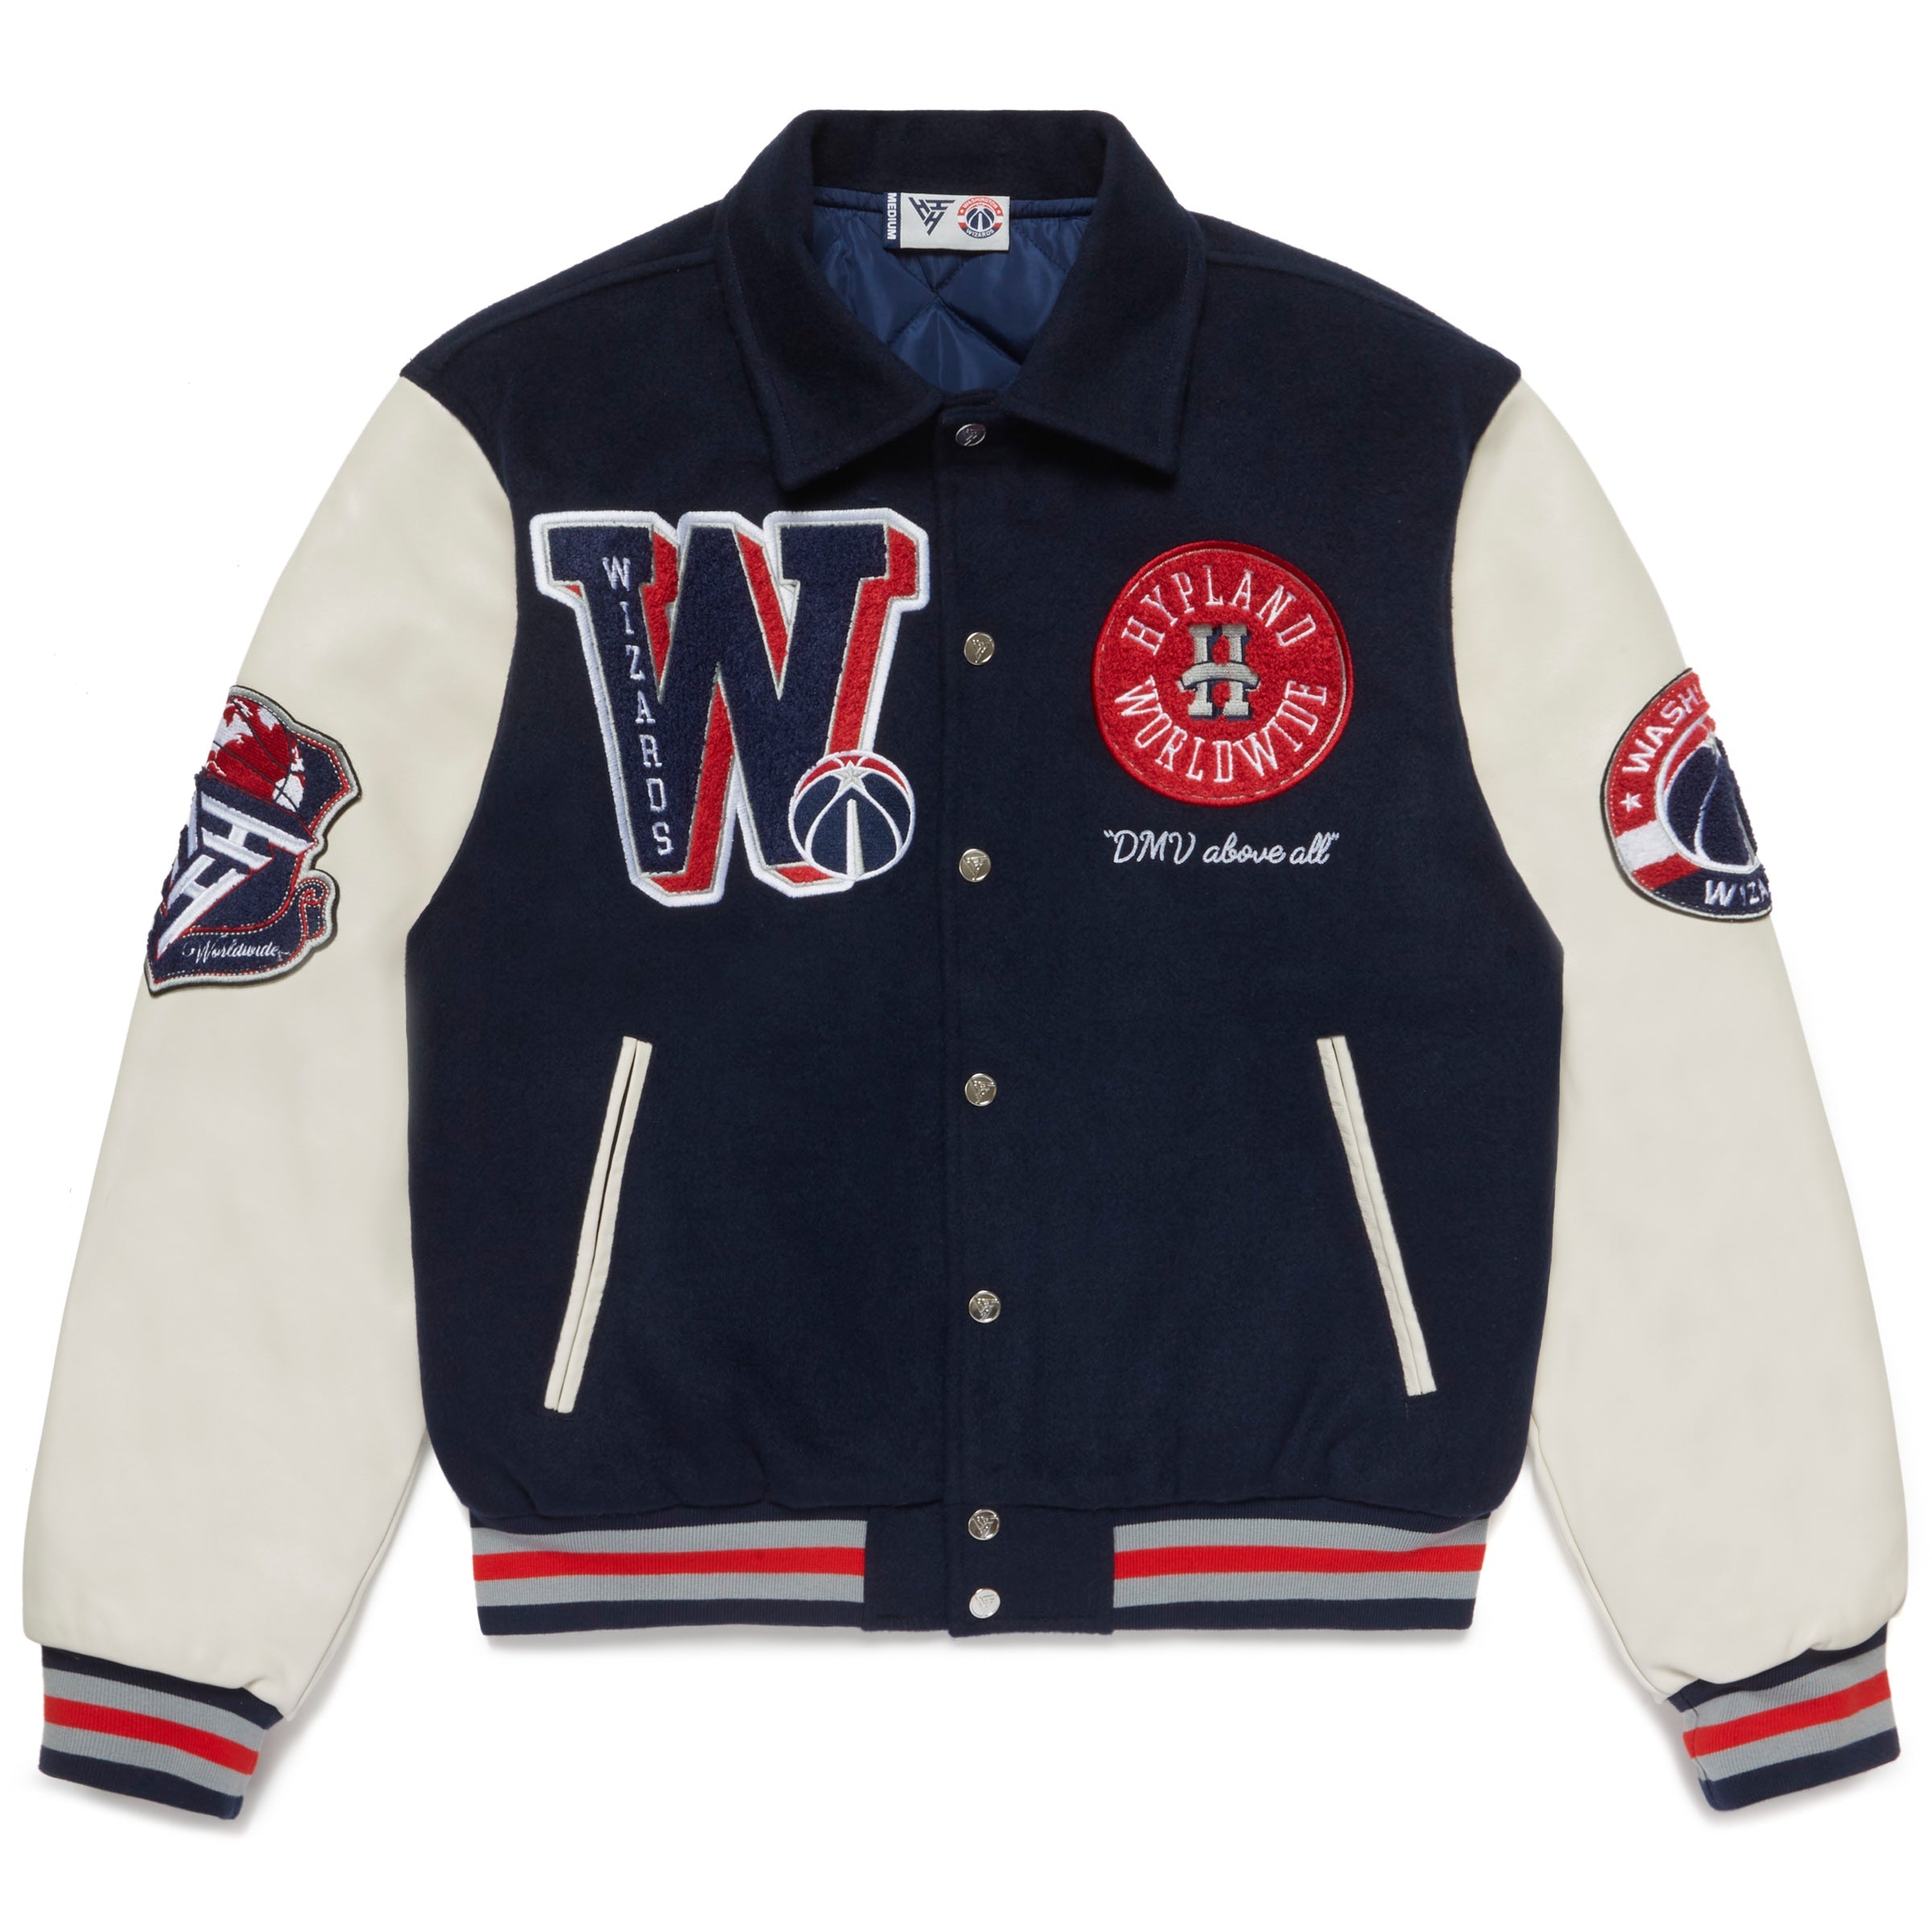 The Future Is Ours Varsity Jacket - Blue